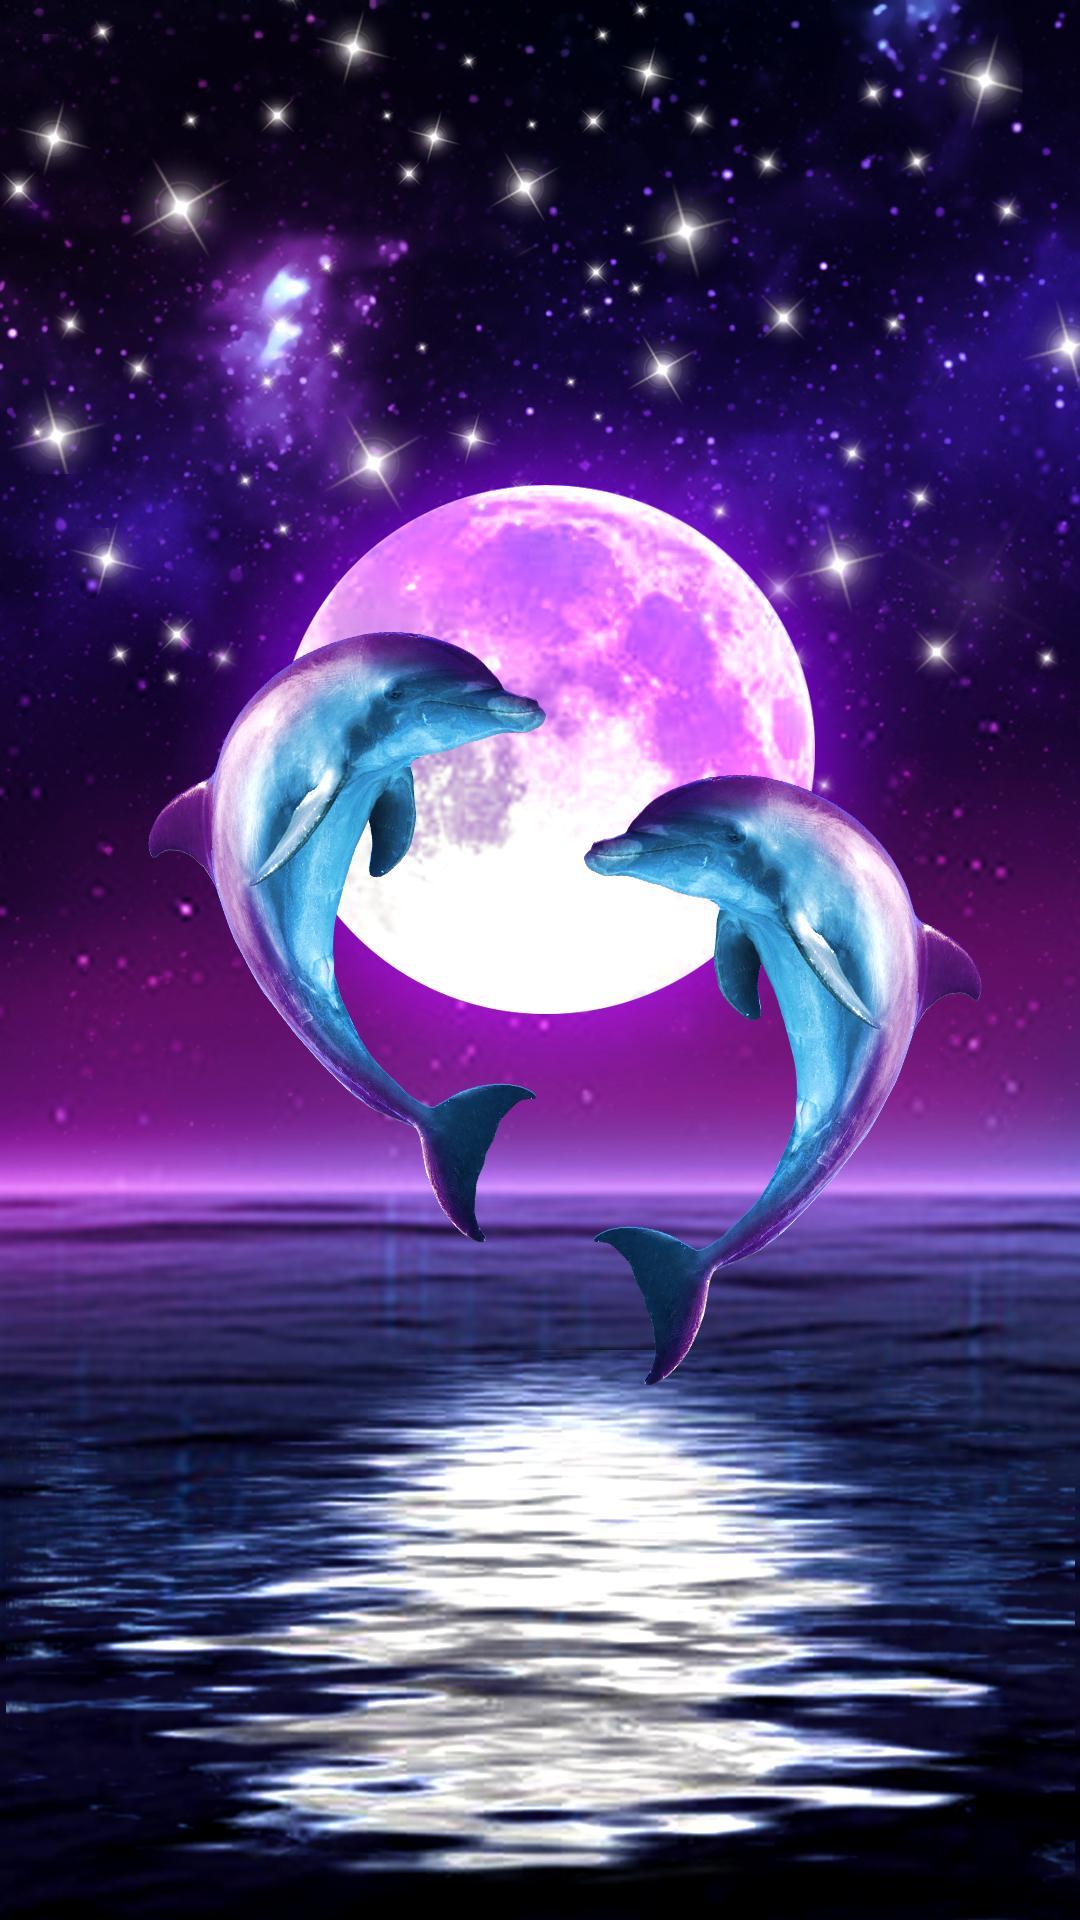 Dolphin Live Wallpaper Free:Amazon.com:Appstore for Android